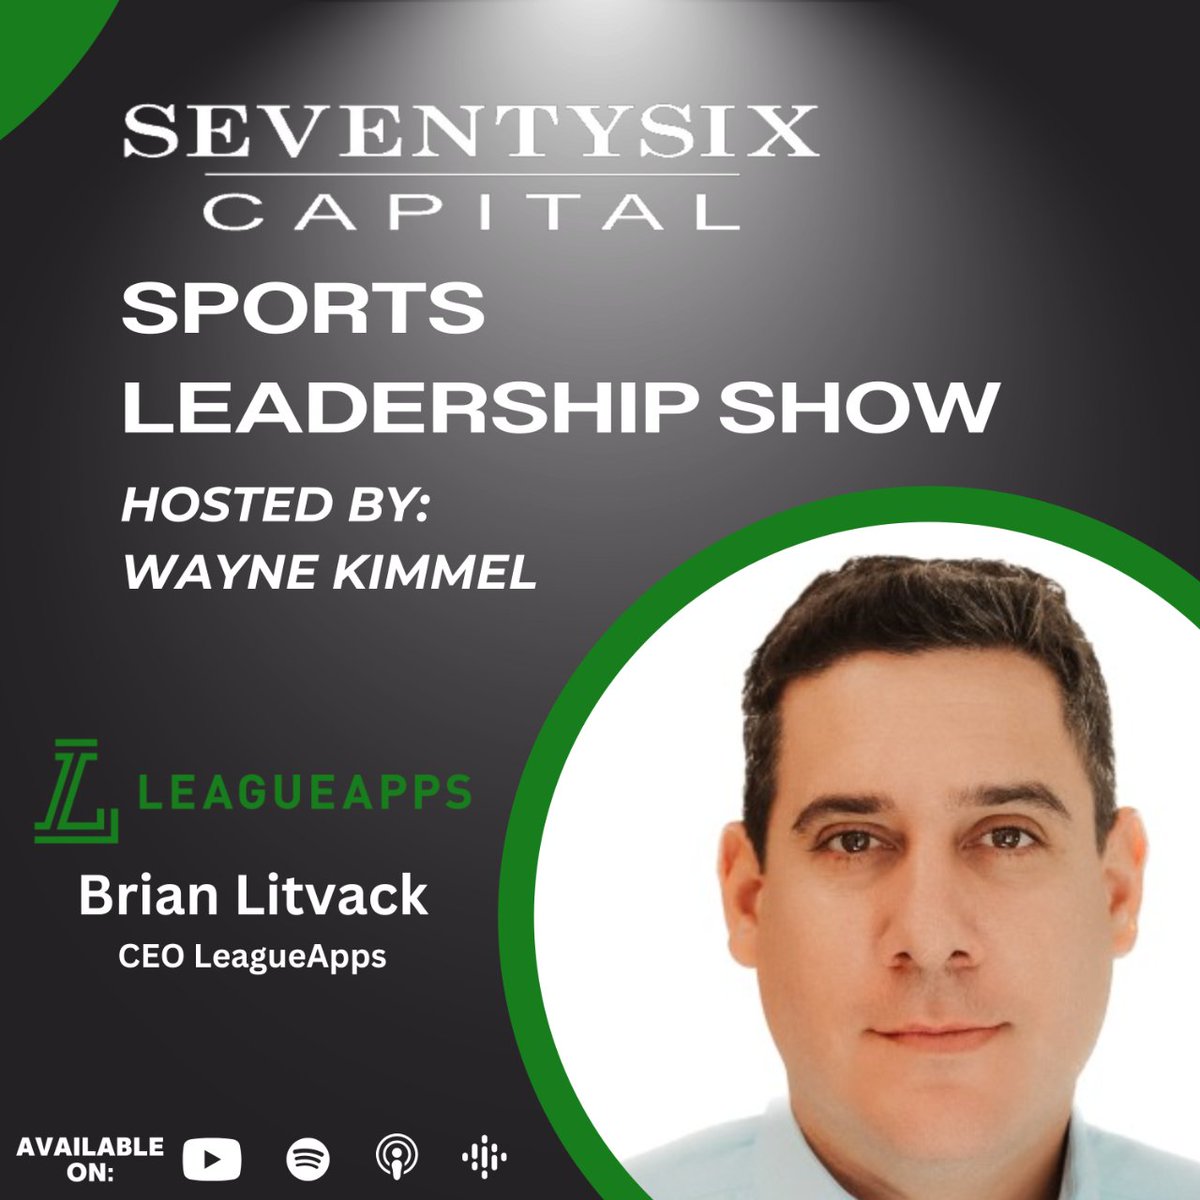 🎙 Check out @twittyhoops, CEO of @leagueapps, on the latest episode of the Sports Leadership Show, hosted by @waynekimmel.  Full episode 👉 bit.ly/SSCSLS #SportsTechVC #Sportsbiz #LeagueApps #AssetClassofSports